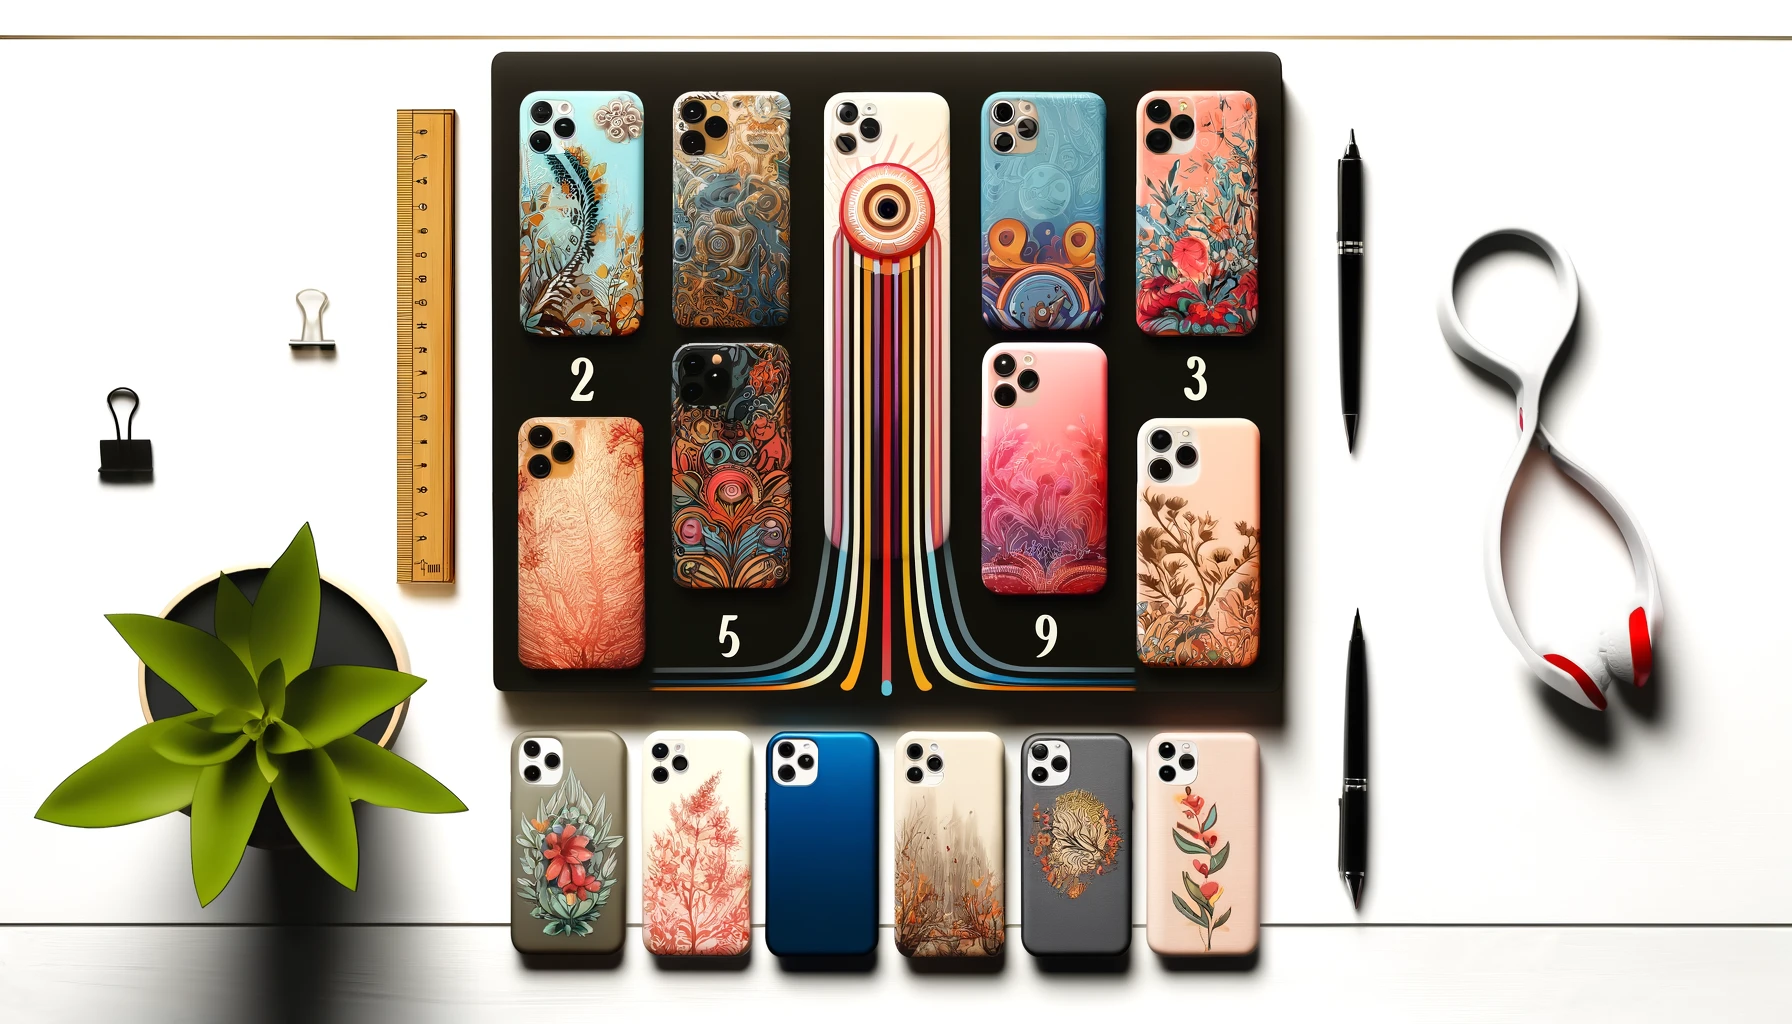 An image showing the popularity ranking of CASETiFY phone cases. Include a top 10 list with different designs and the word 'CASETiFY' prominently displayed.